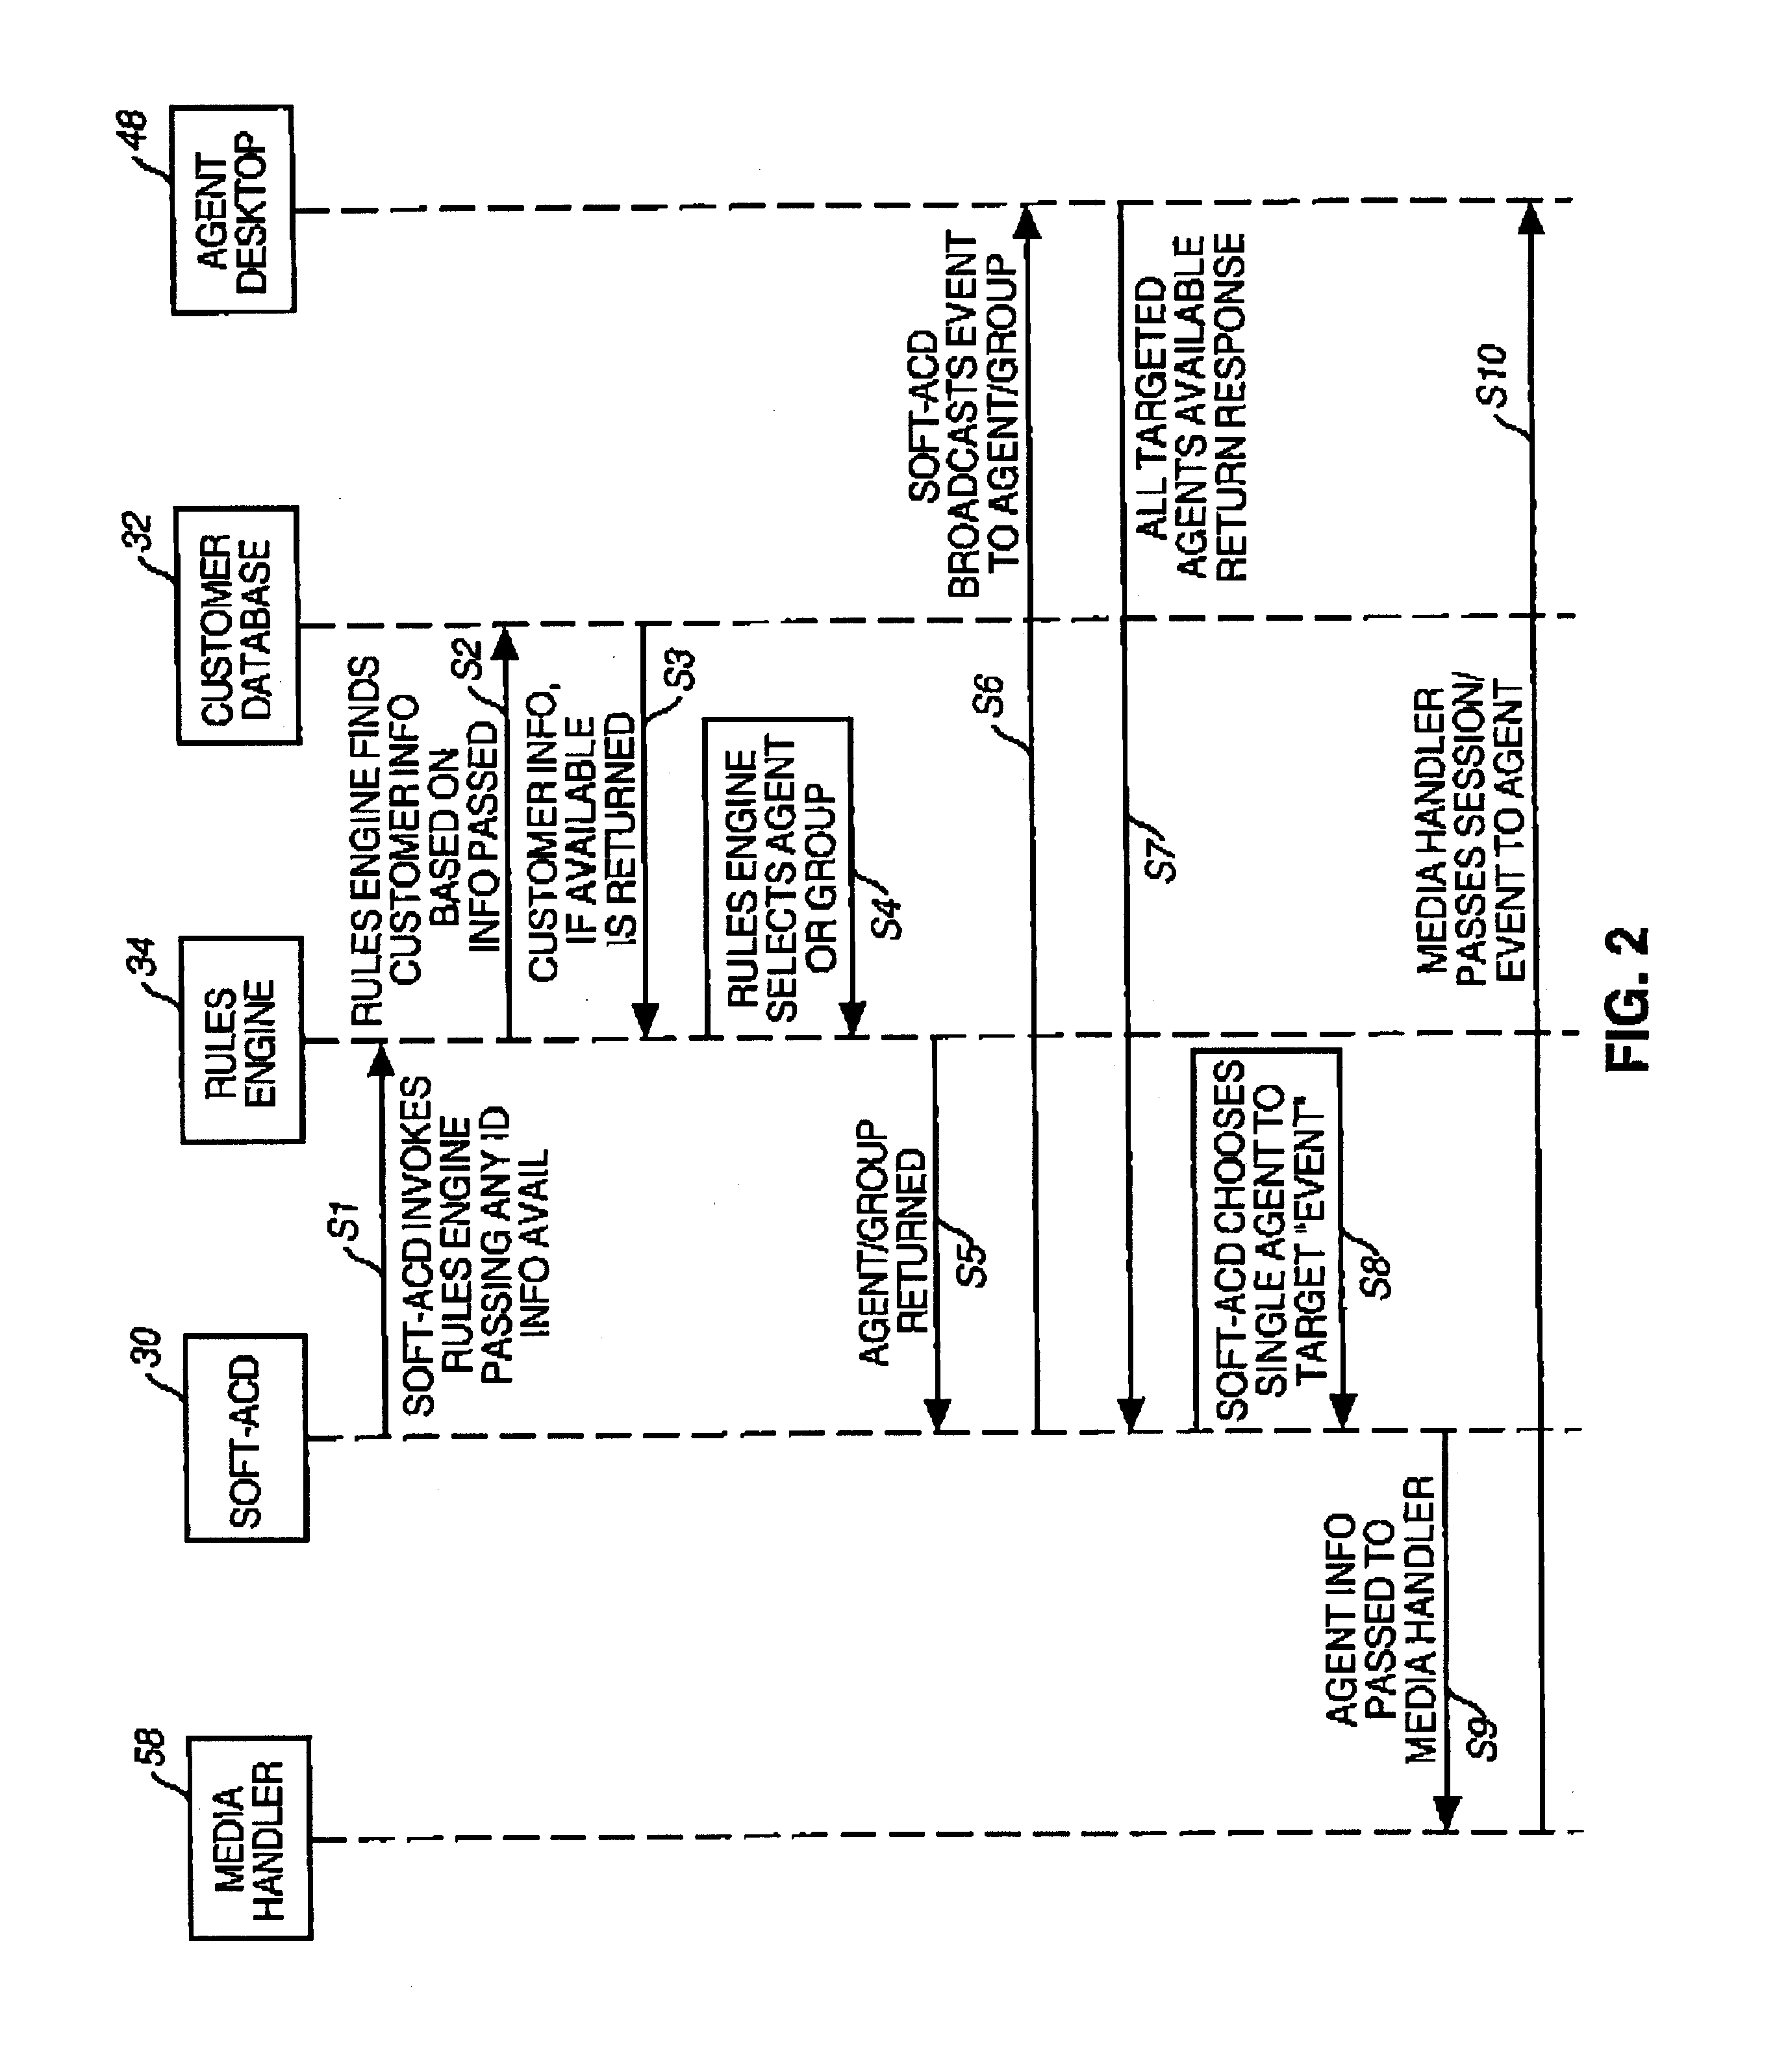 Method and apparatus for automatic call distribution